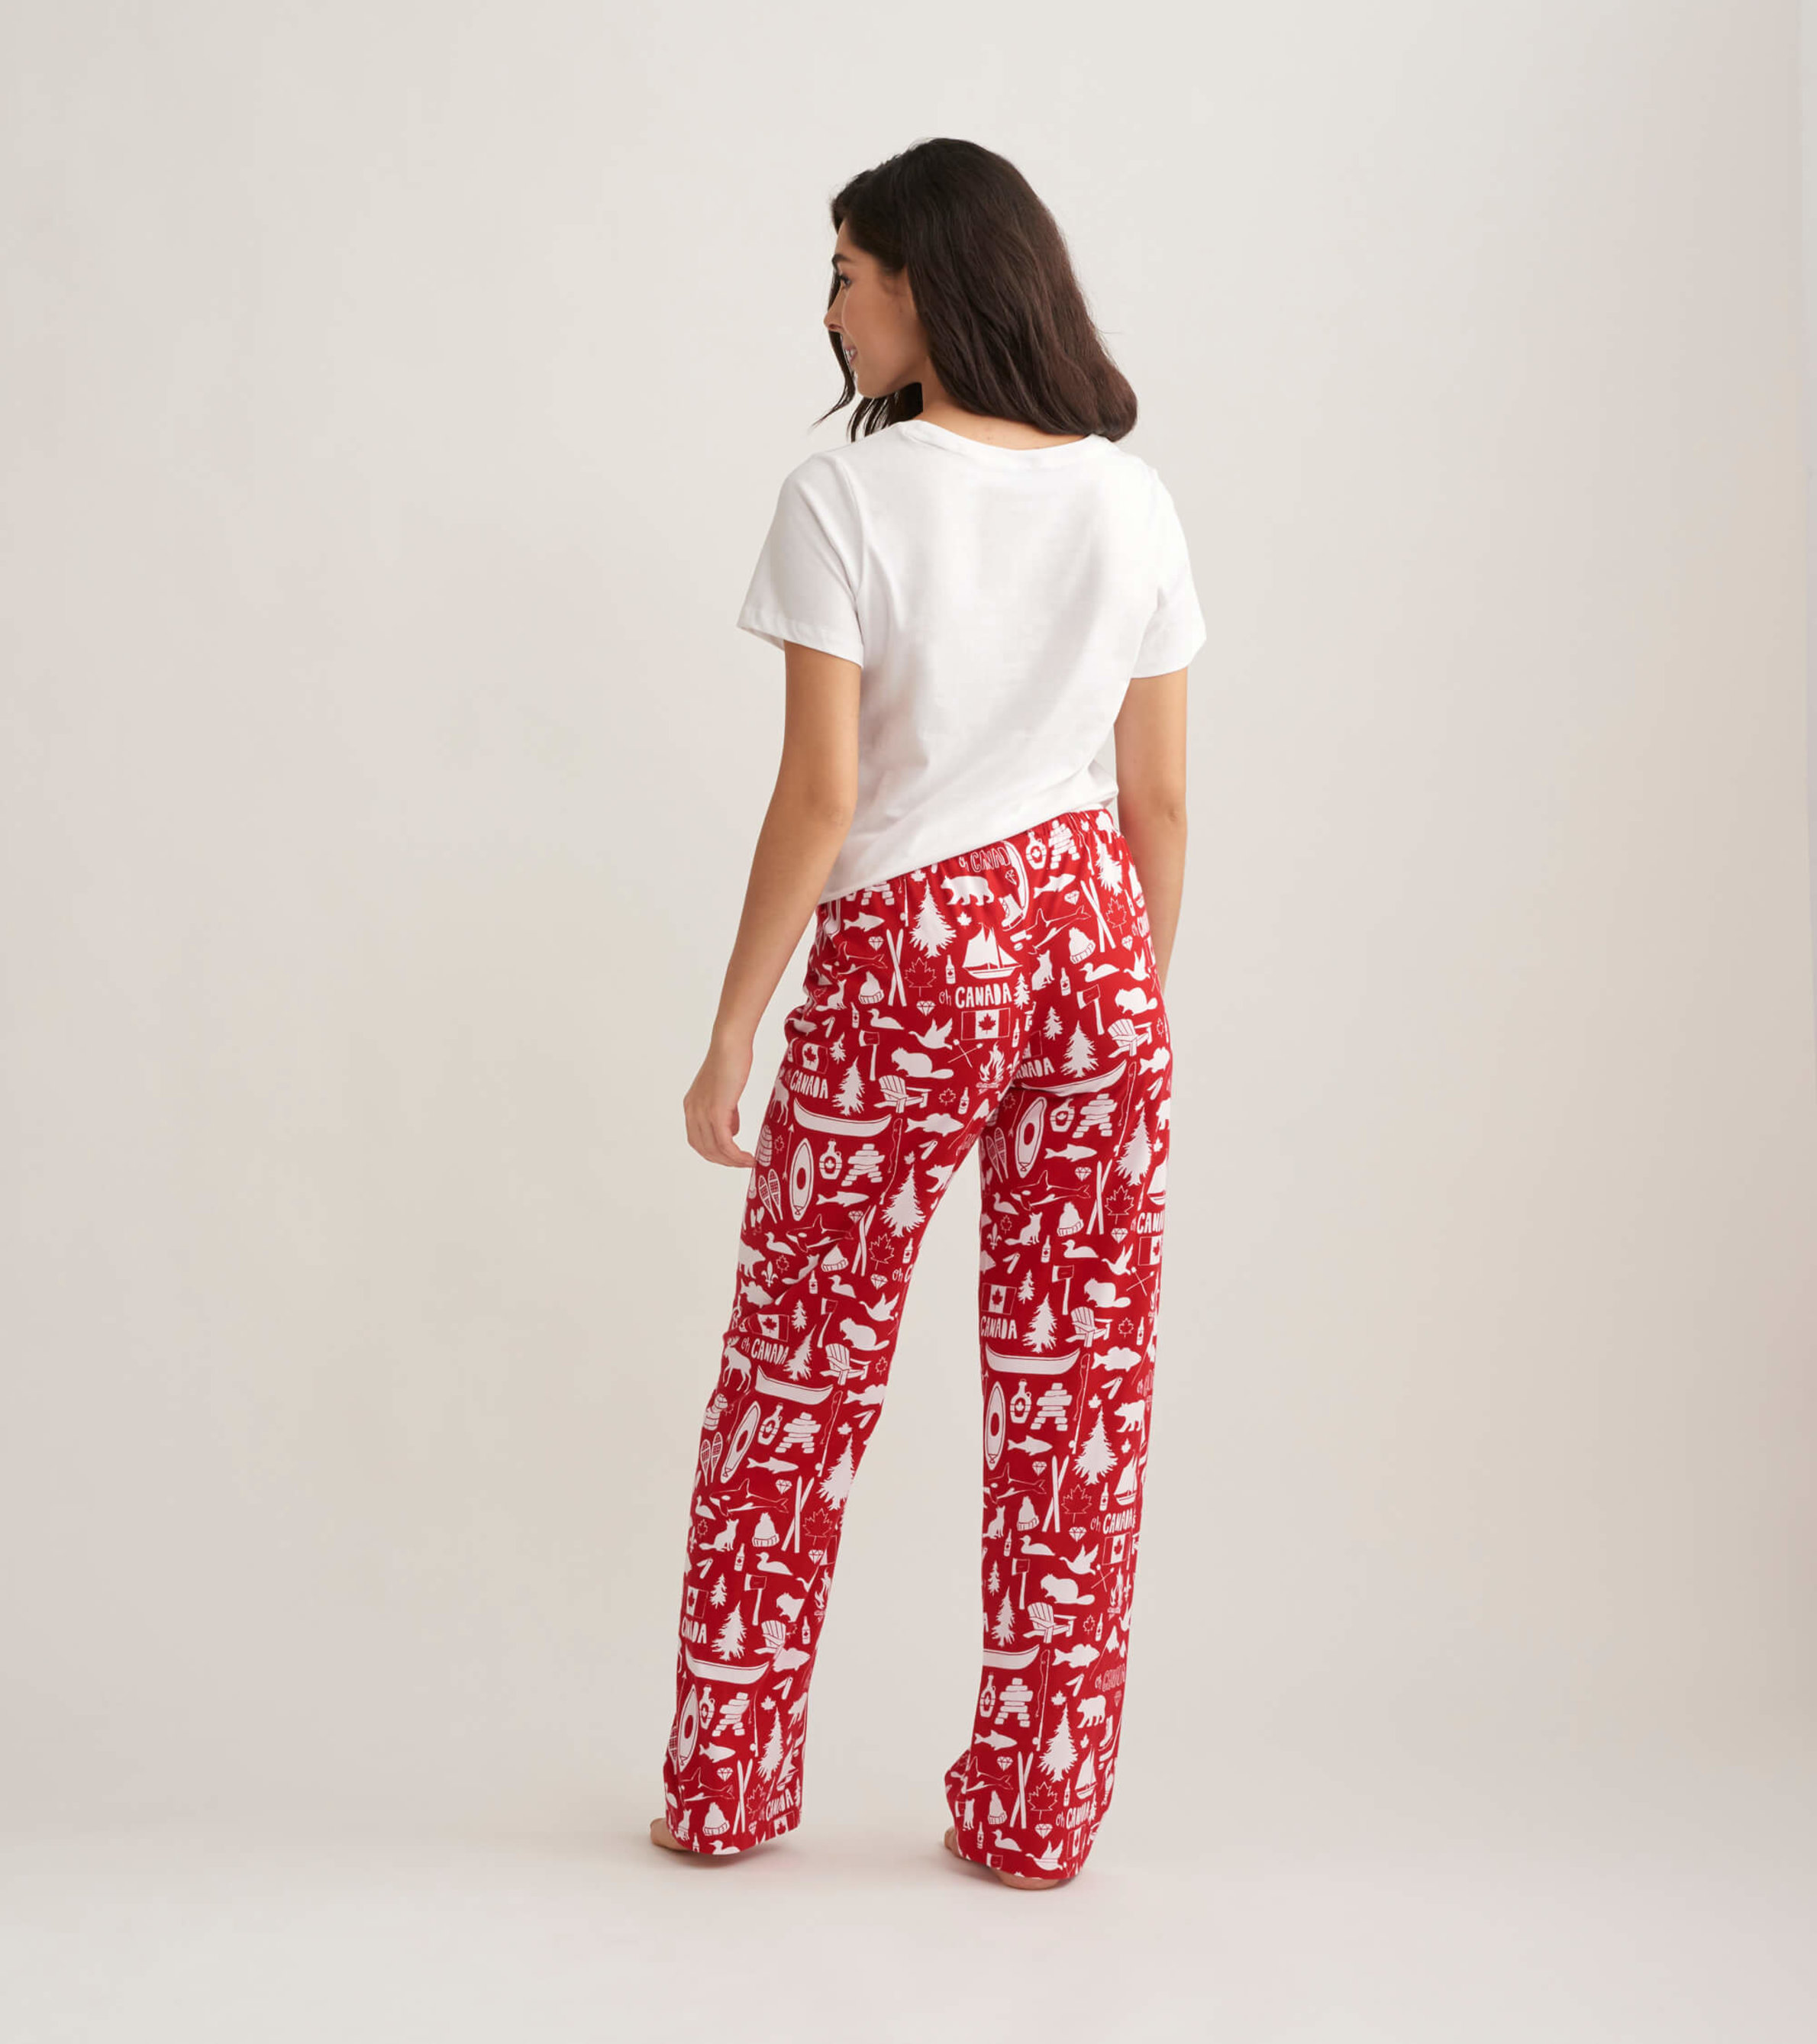 https://cdn.littlebluehouse.com/product_images/oh-canada-womens-tee-and-pants-pajama-set/GPF20LL025_A_jpg/pdp_zoom.jpg?c=1603989854&locale=us_en